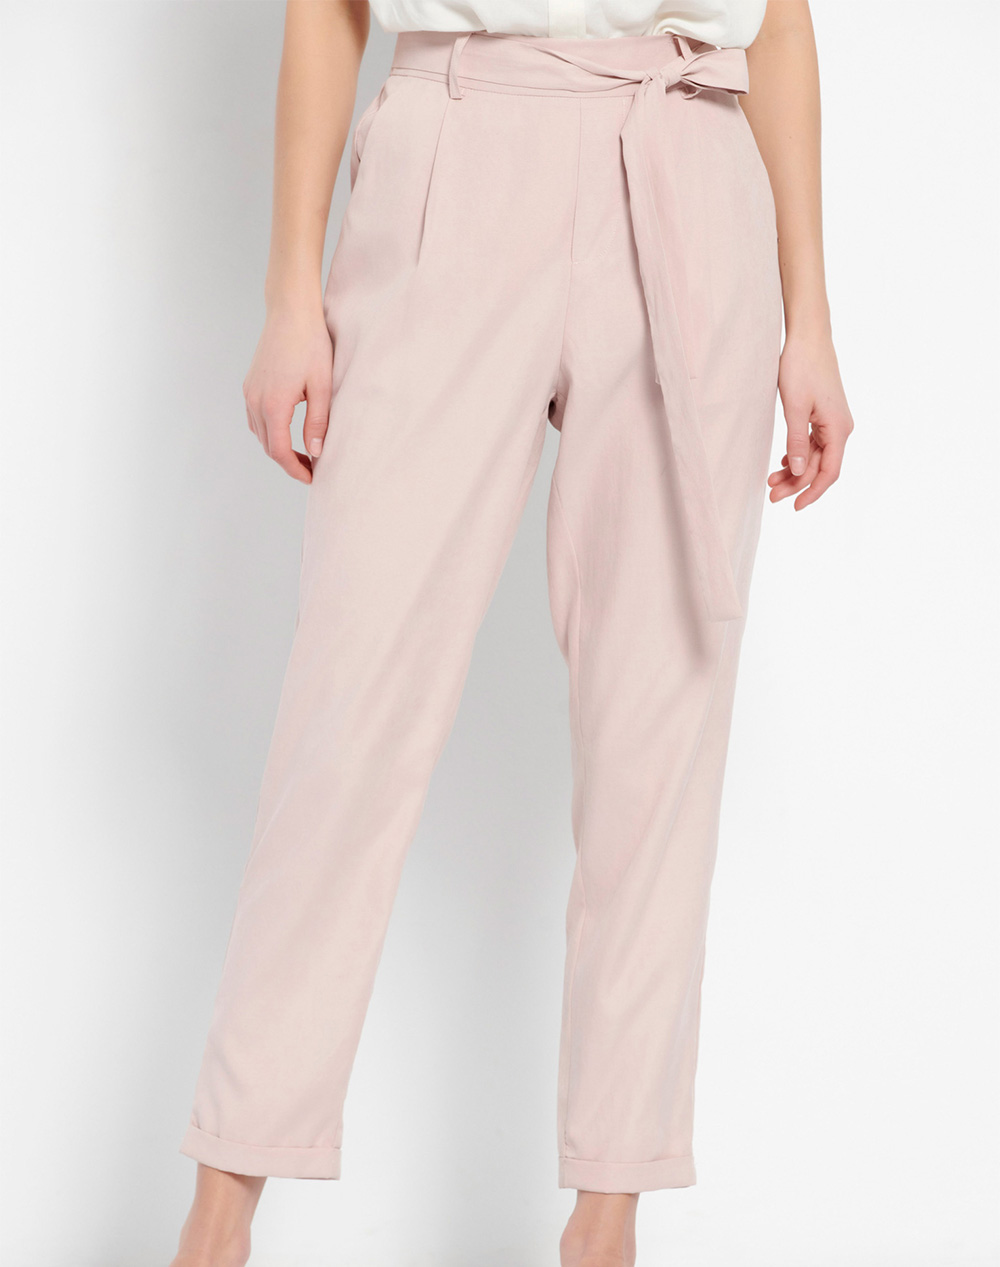 Peg Trousers  Buy Peg Trousers online in India